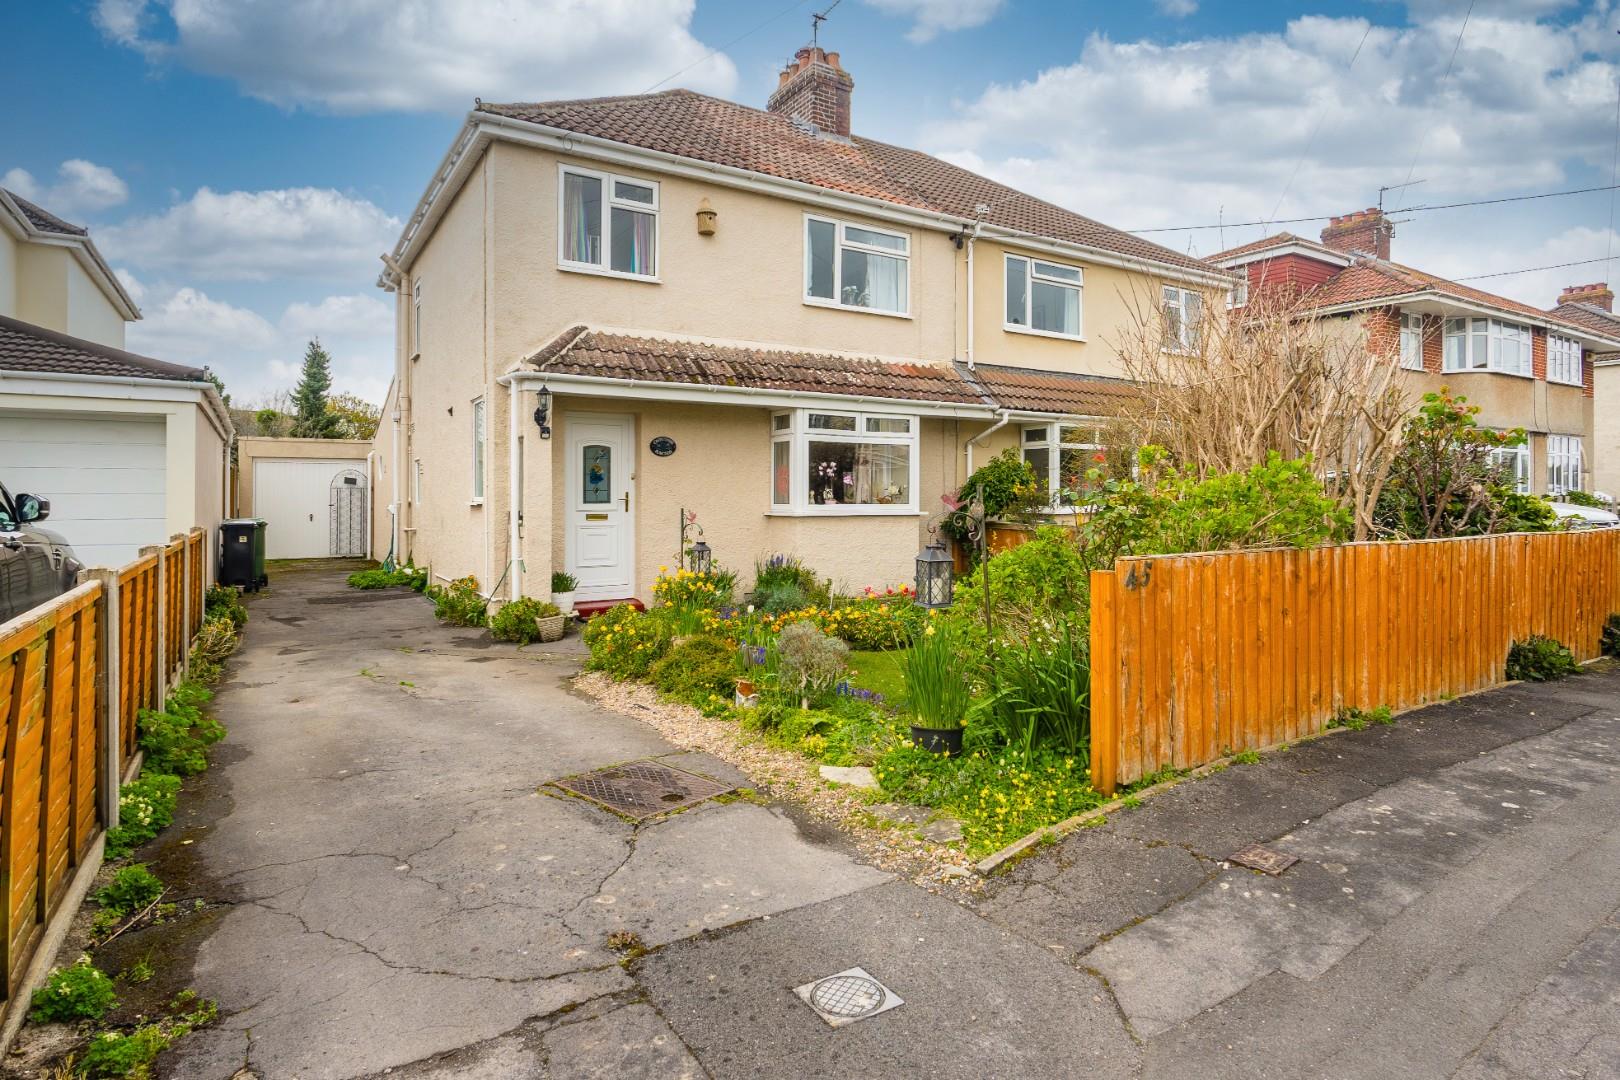 Extended three bedroom family home located within the ever popular Derham Park, in the heart of Yatton village,